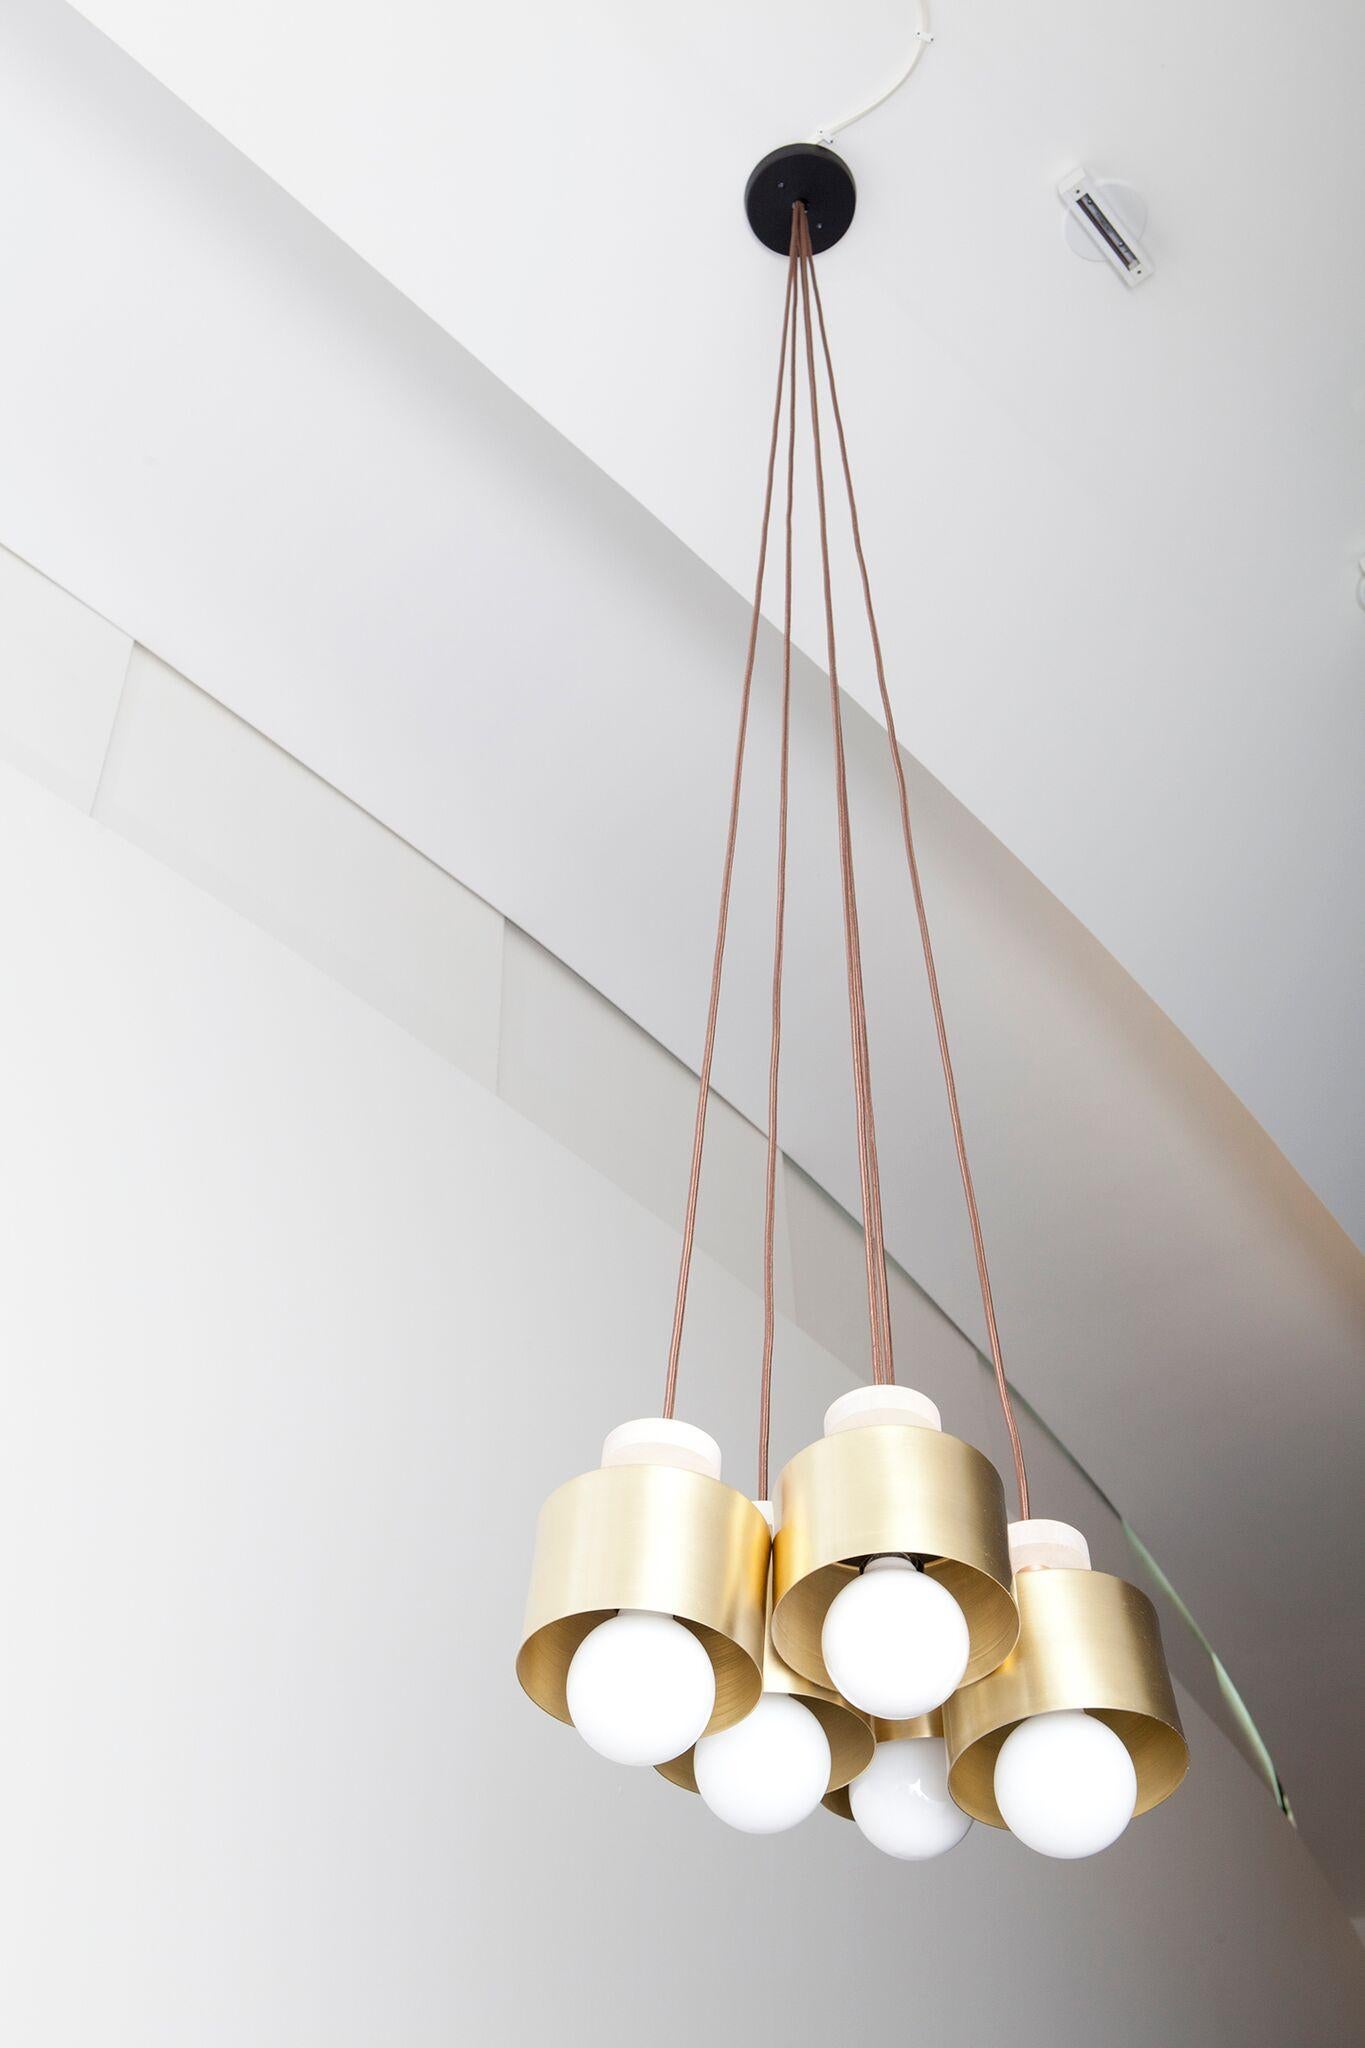 Spun Pendant in Polished Brass with Adjustable Drop light fixture For Sale 2